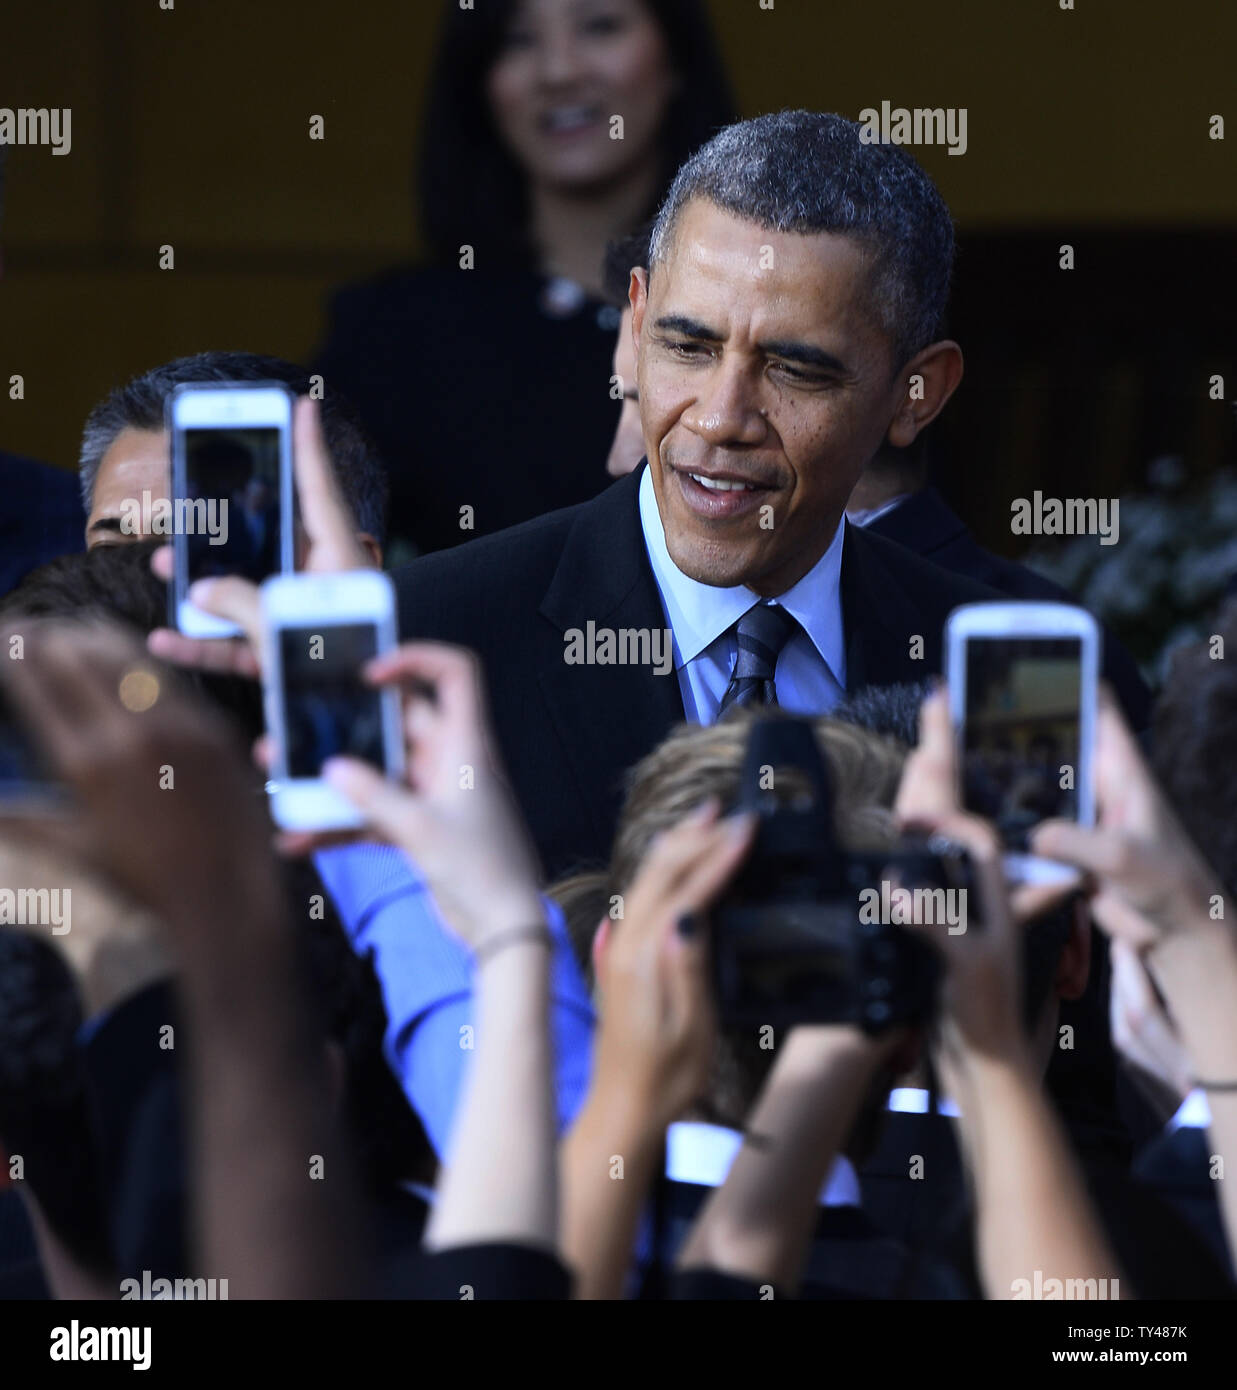 President Barack Obama shakes hands after addressing a crowd of 2,000 people at DreamWorks studios following a tour of the campus in Glendale, California on November 26, 2013. Obama hailed the entertainment industry as an economic "bright spot" that reflects positive American values.  UPI/Jim Ruymen Stock Photo